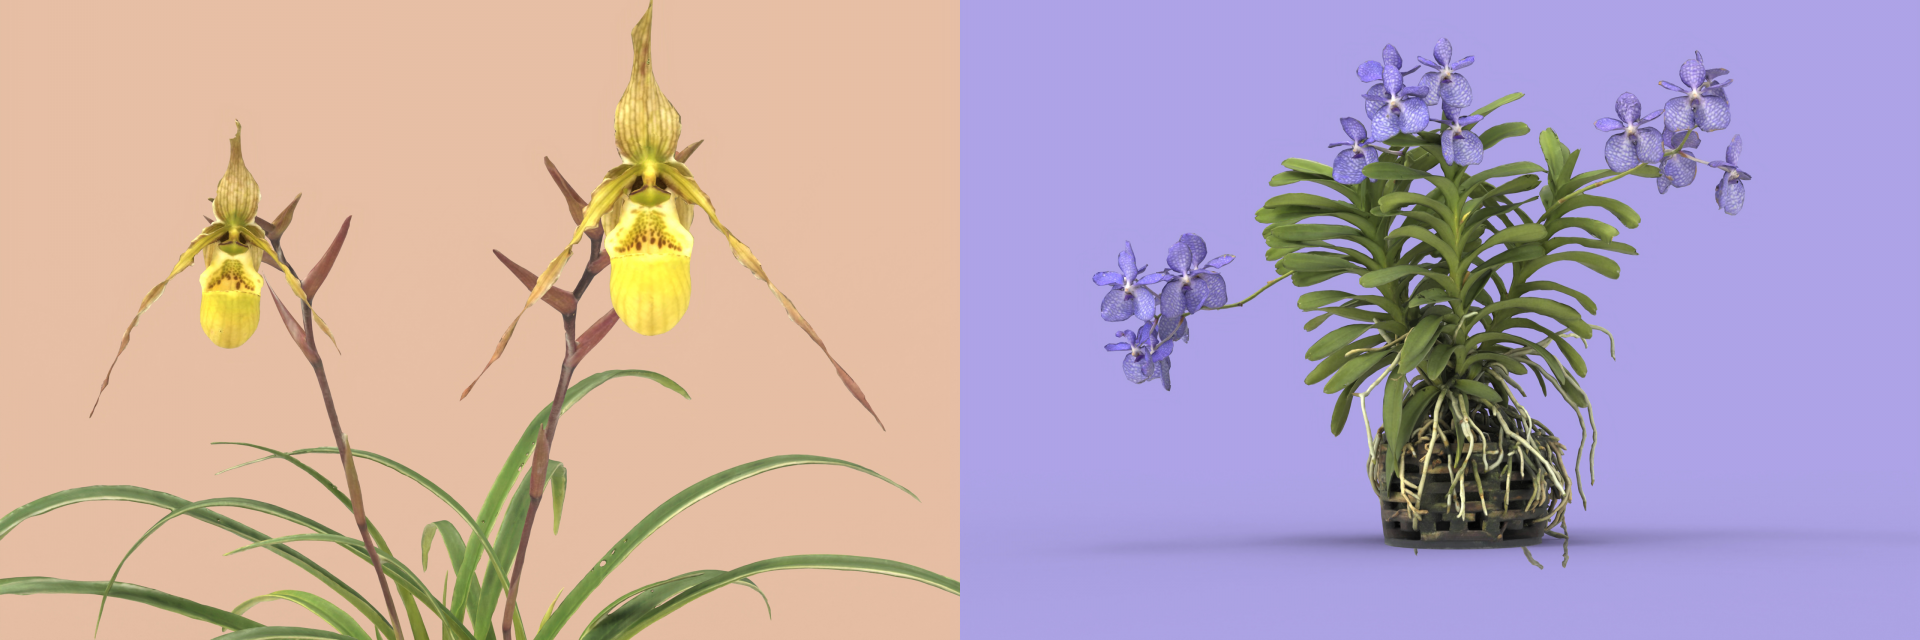 colorful tiled image showing 4 orchid plants with blooms